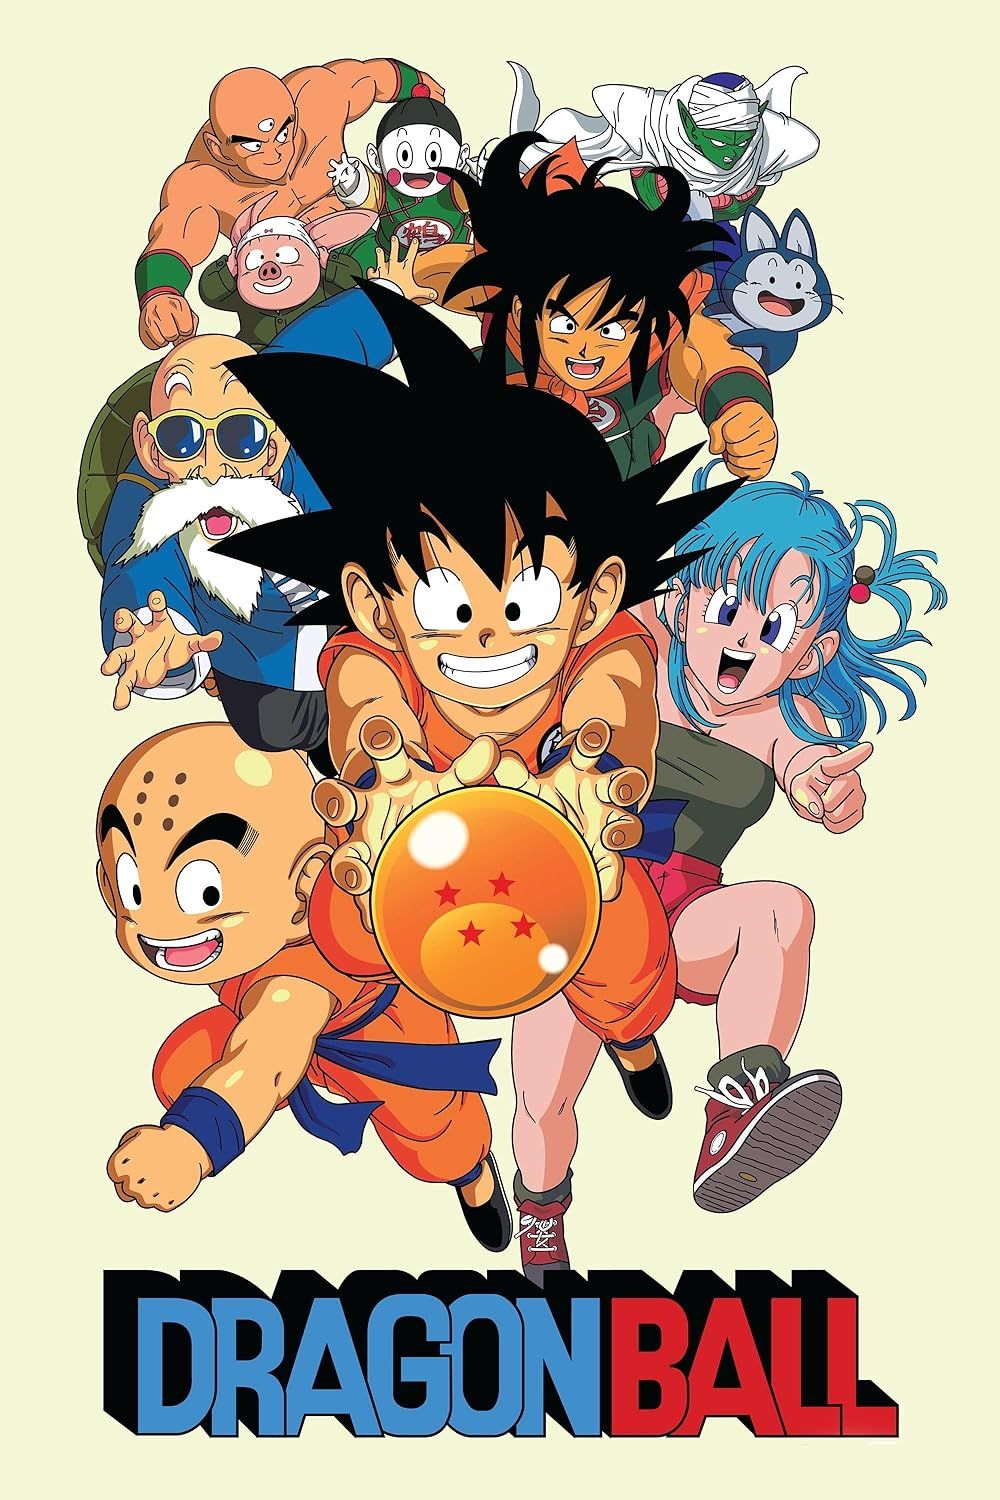 The Dragon Ball Cast Stand Behind a Young Son Goku